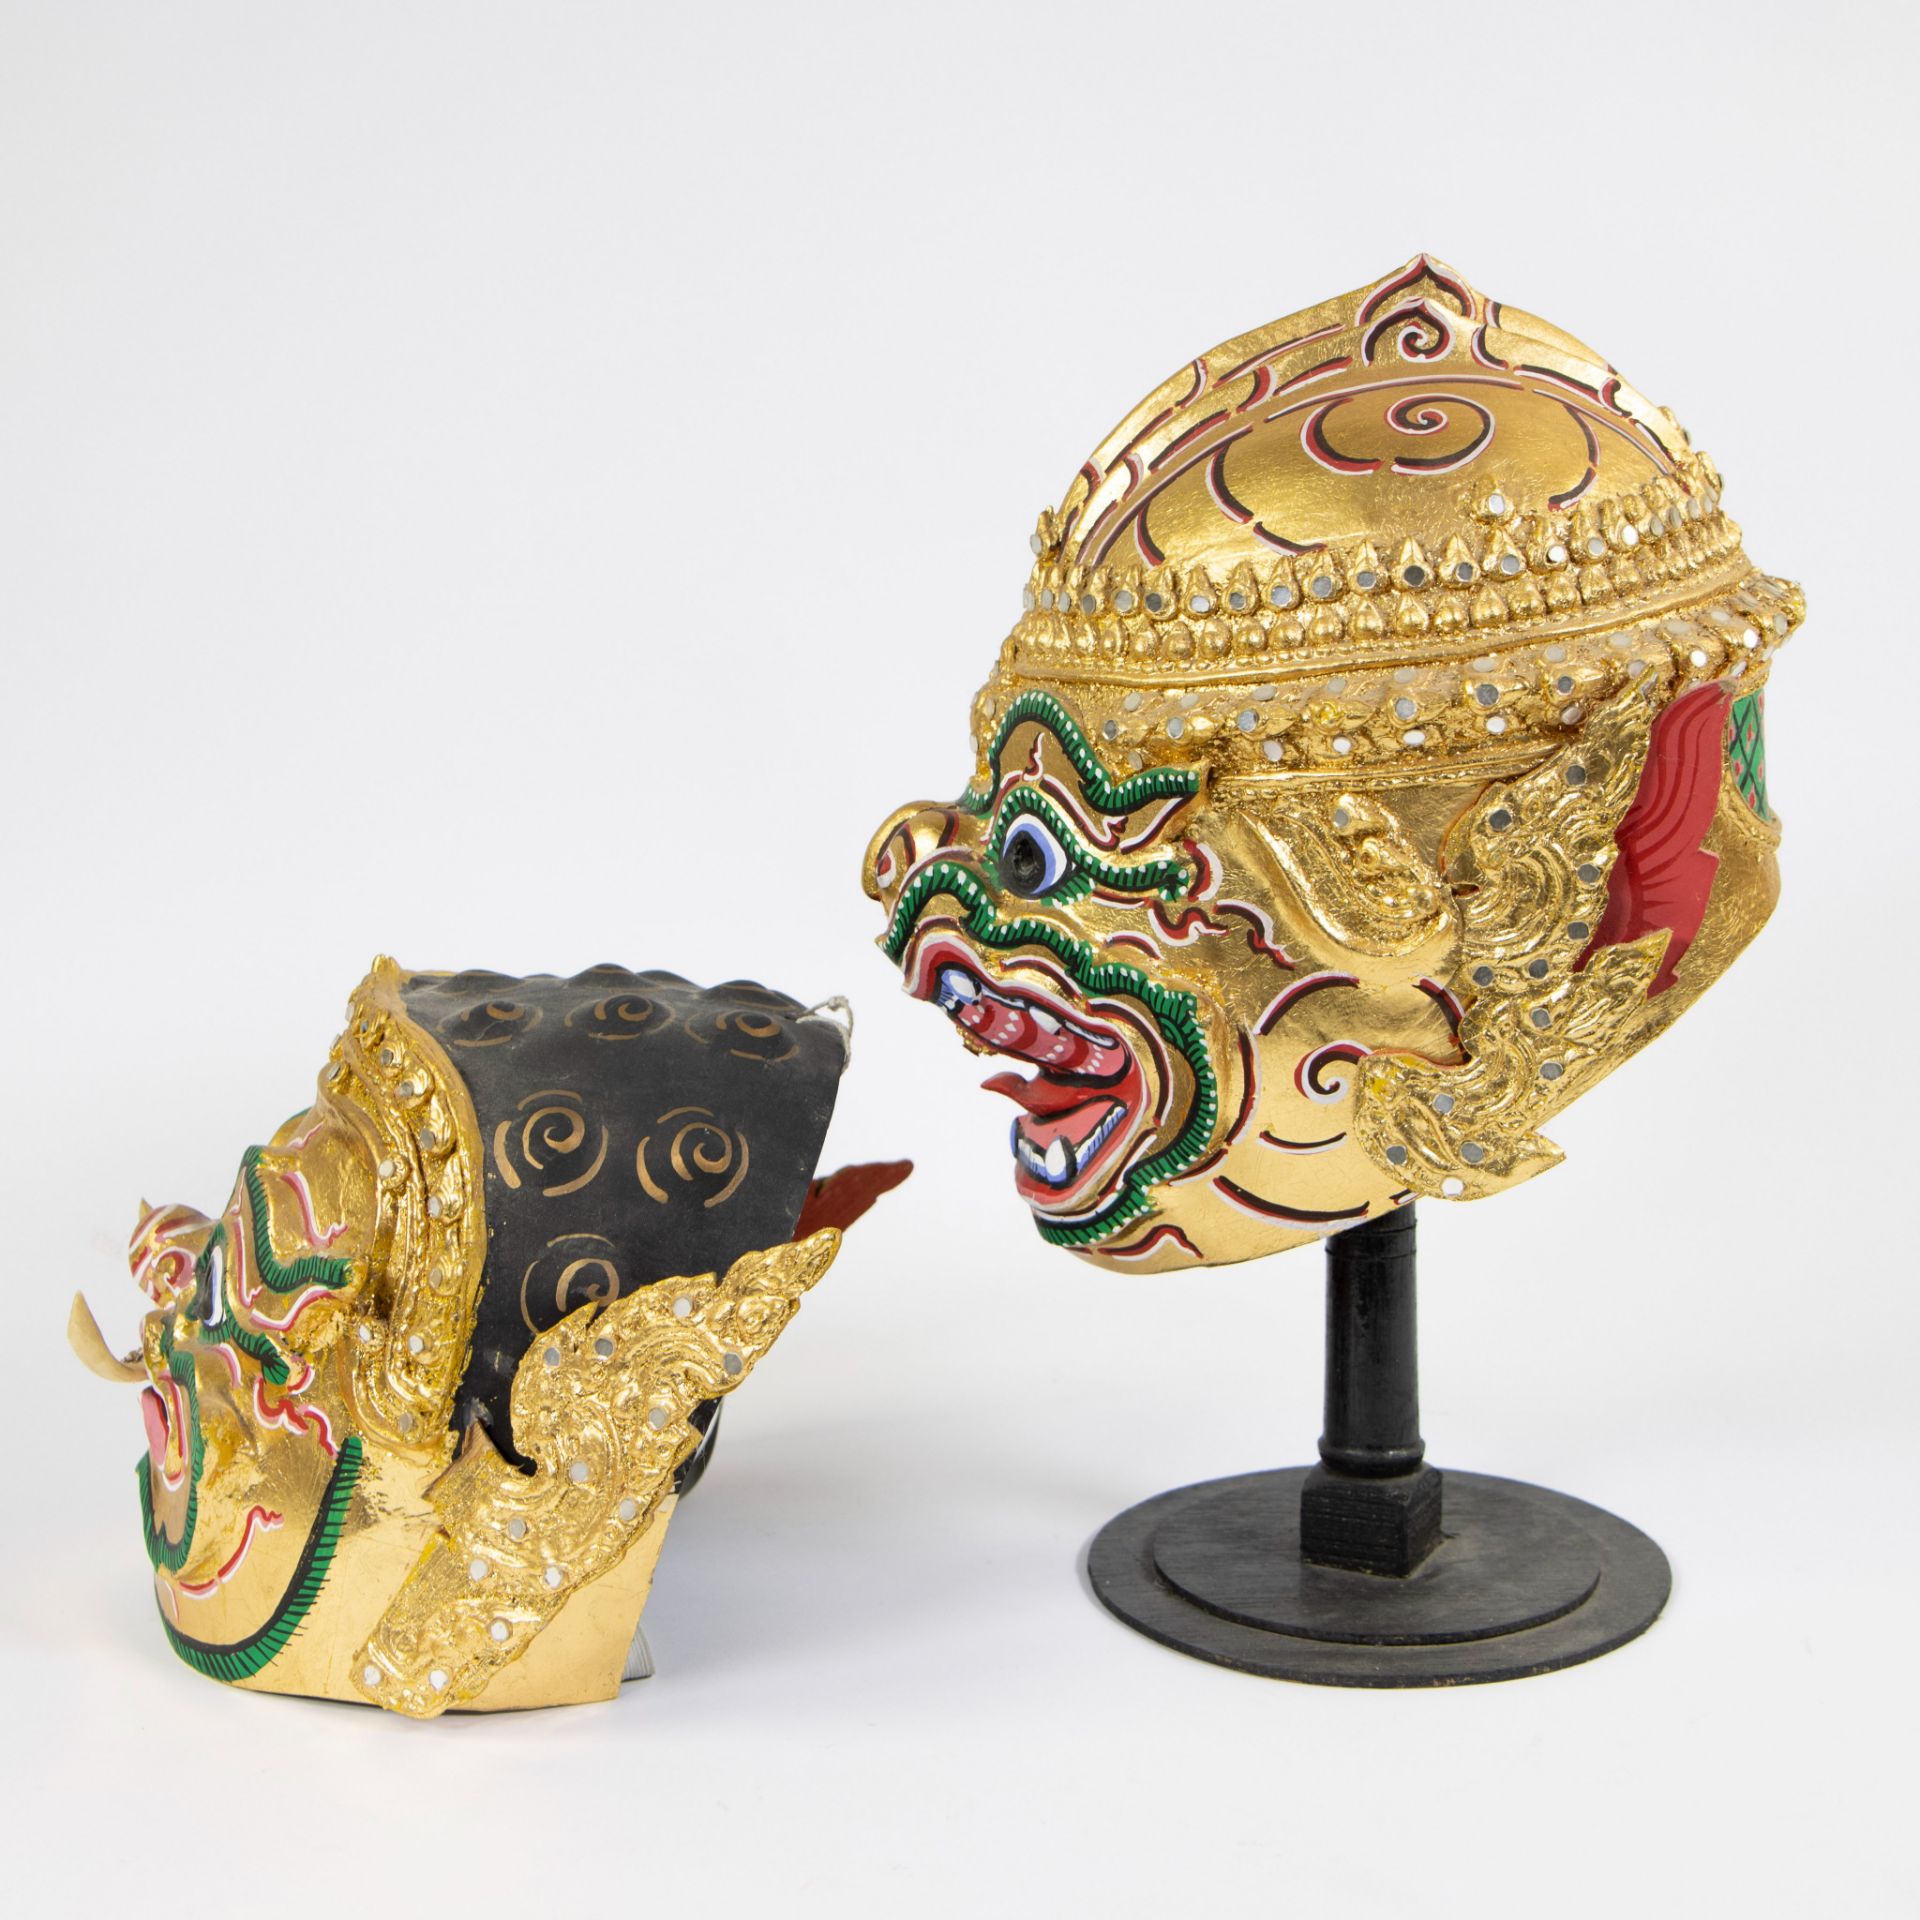 Two Thai gold plated dance masks - Khon masks in papier mache - Image 2 of 4